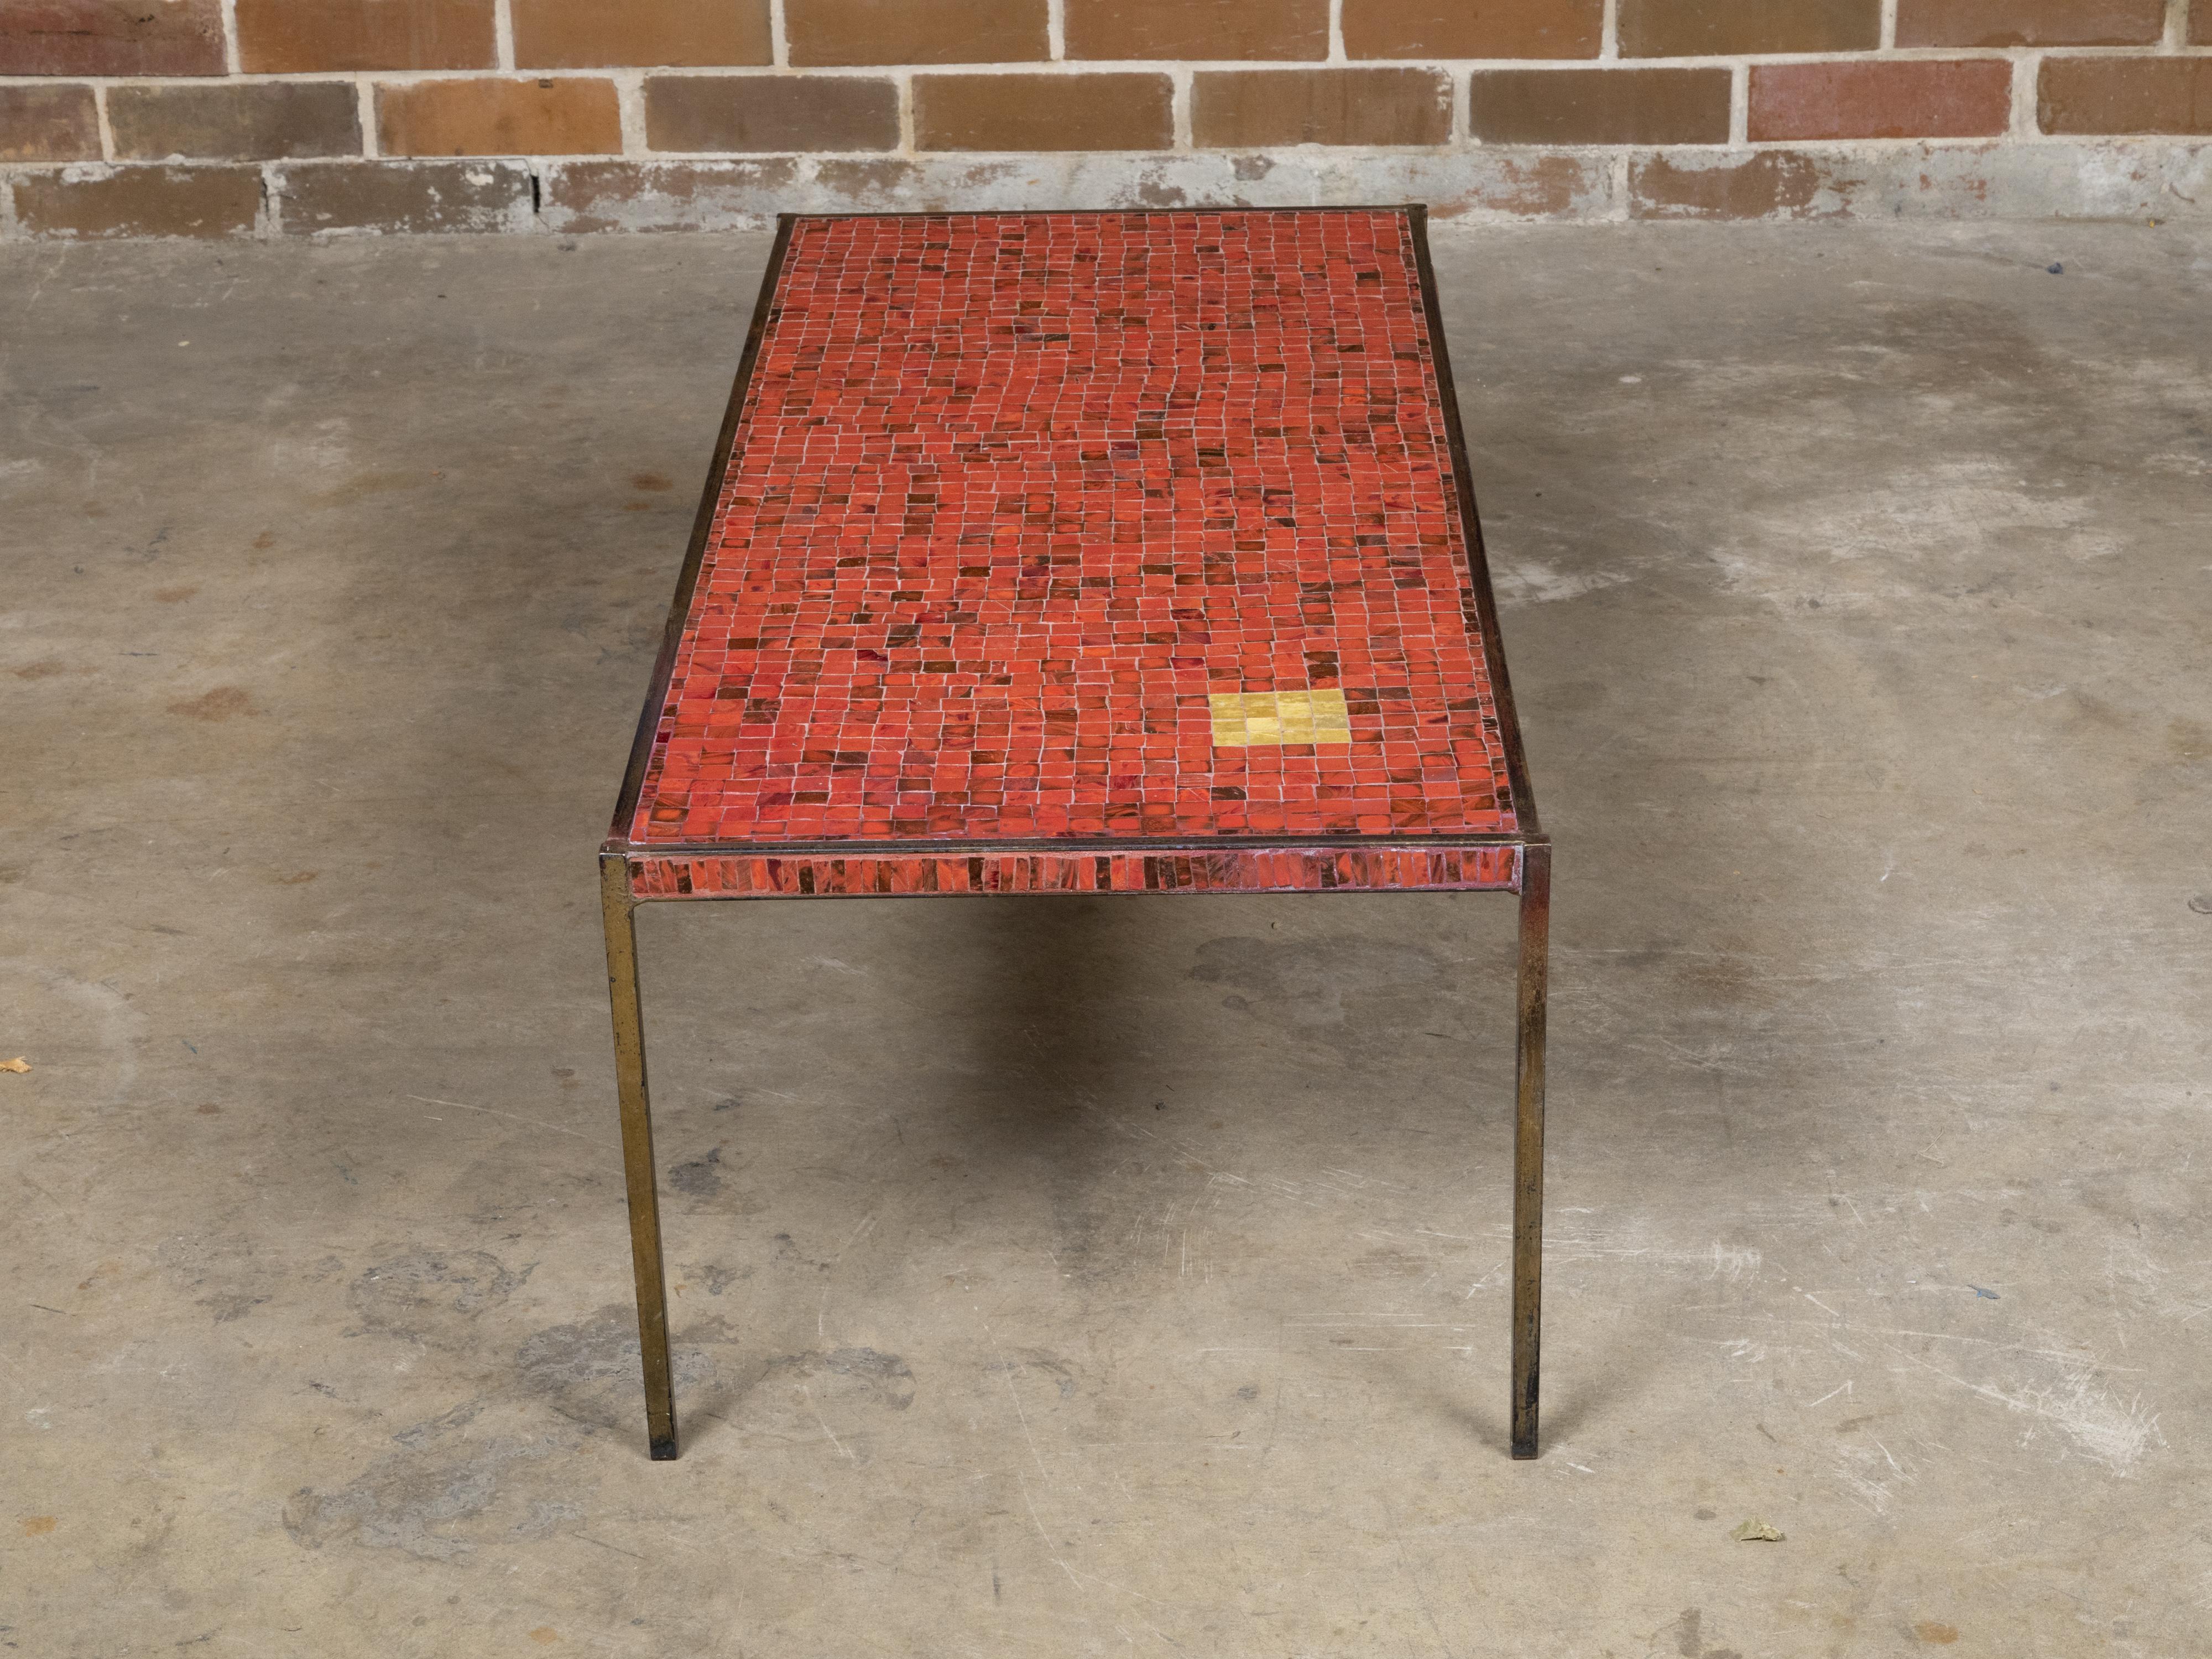 An Italian Midcentury mosaic coffee table with iron base and red glass tile style top. This Italian Midcentury mosaic coffee table embodies the vibrant essence and artistic flair of the mid-20th century. It stands out with its slender gilt iron